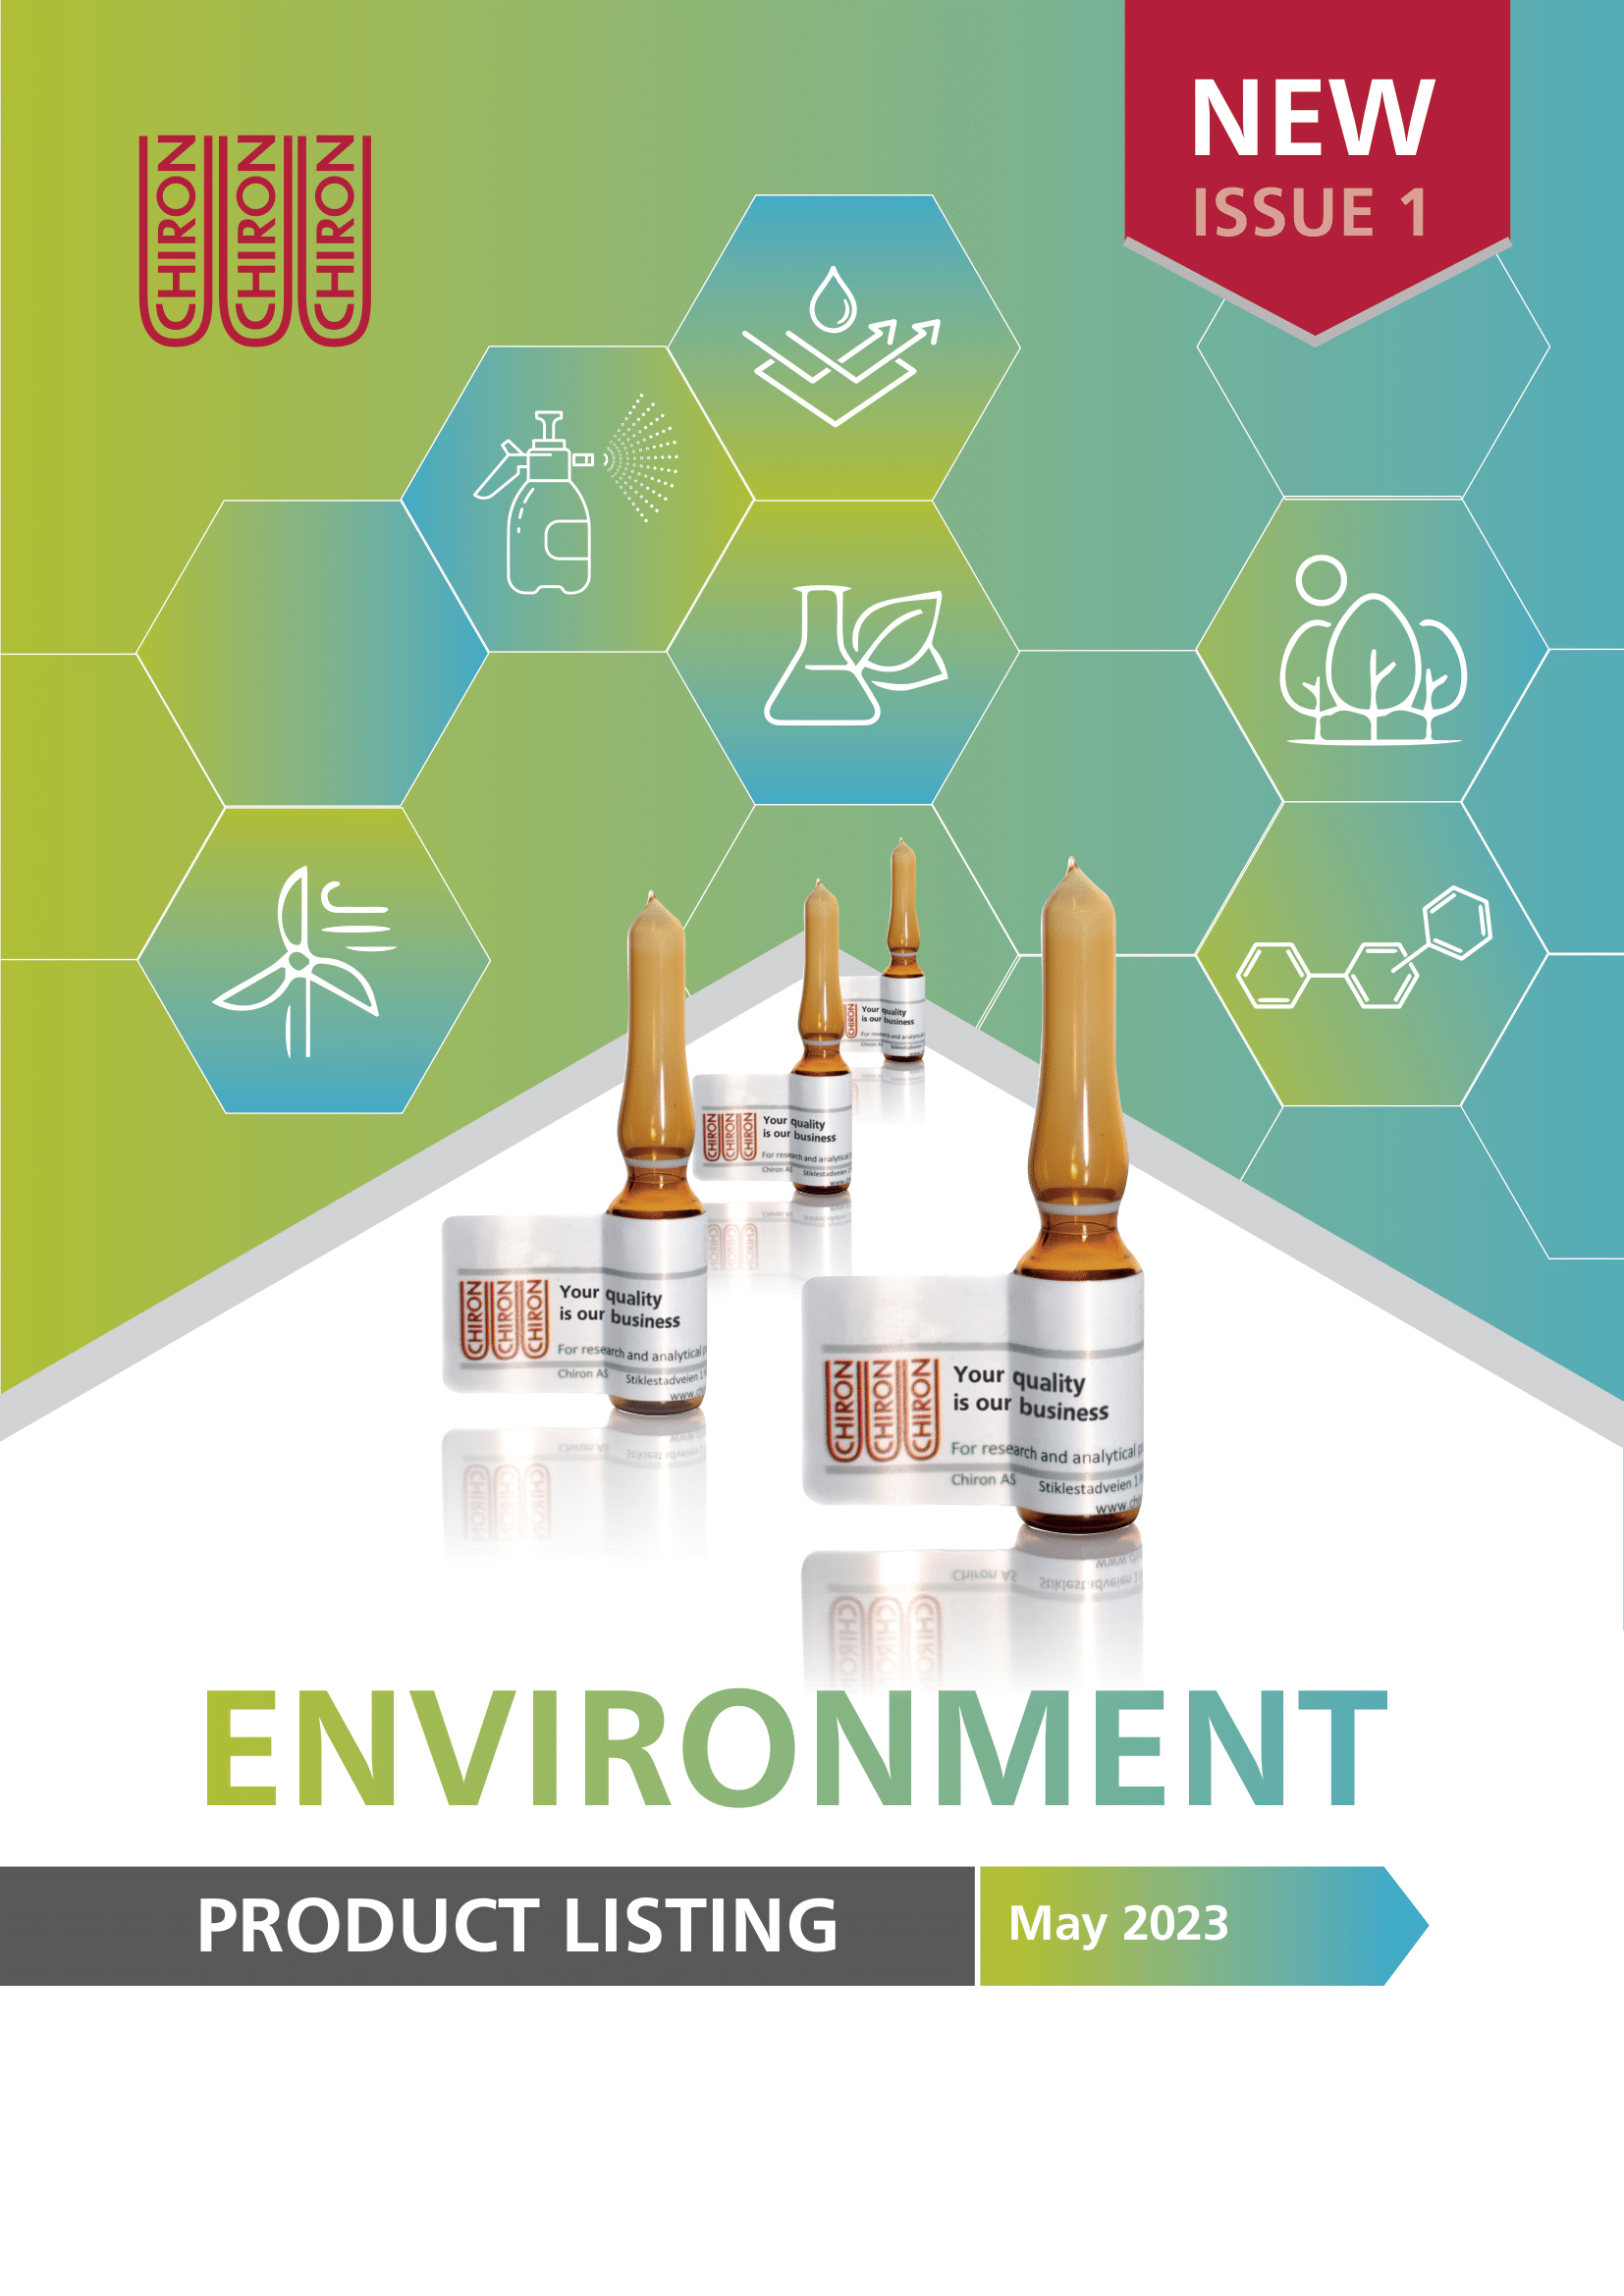 New Environmental Product Issue 1 | May 2023